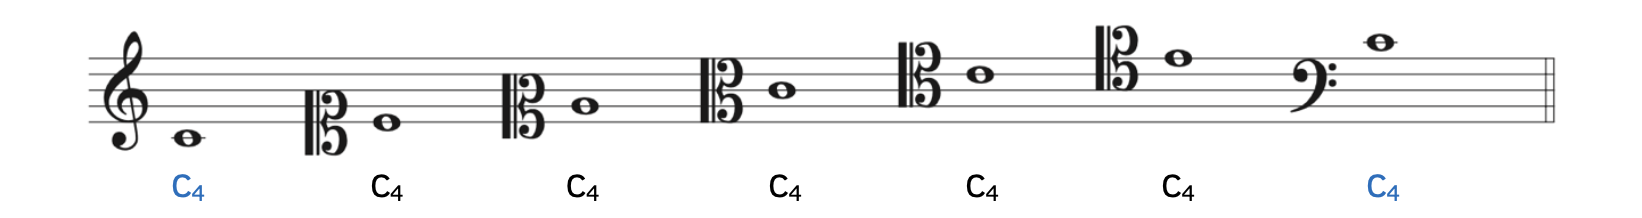 C4 at different octaves. C4 is the ledger line below the staff for treble clef. C4 is the first line on the staff for soprano clef. C4 is the second line on the staff for mezzosoprano clef. C4 is third line on the staff for alto clef. C4 is the fourth line on the staff for tenor clef. C4 is the fifth line on the staff for baritone clef. C4 is the first ledger line above the staff for bass clef.